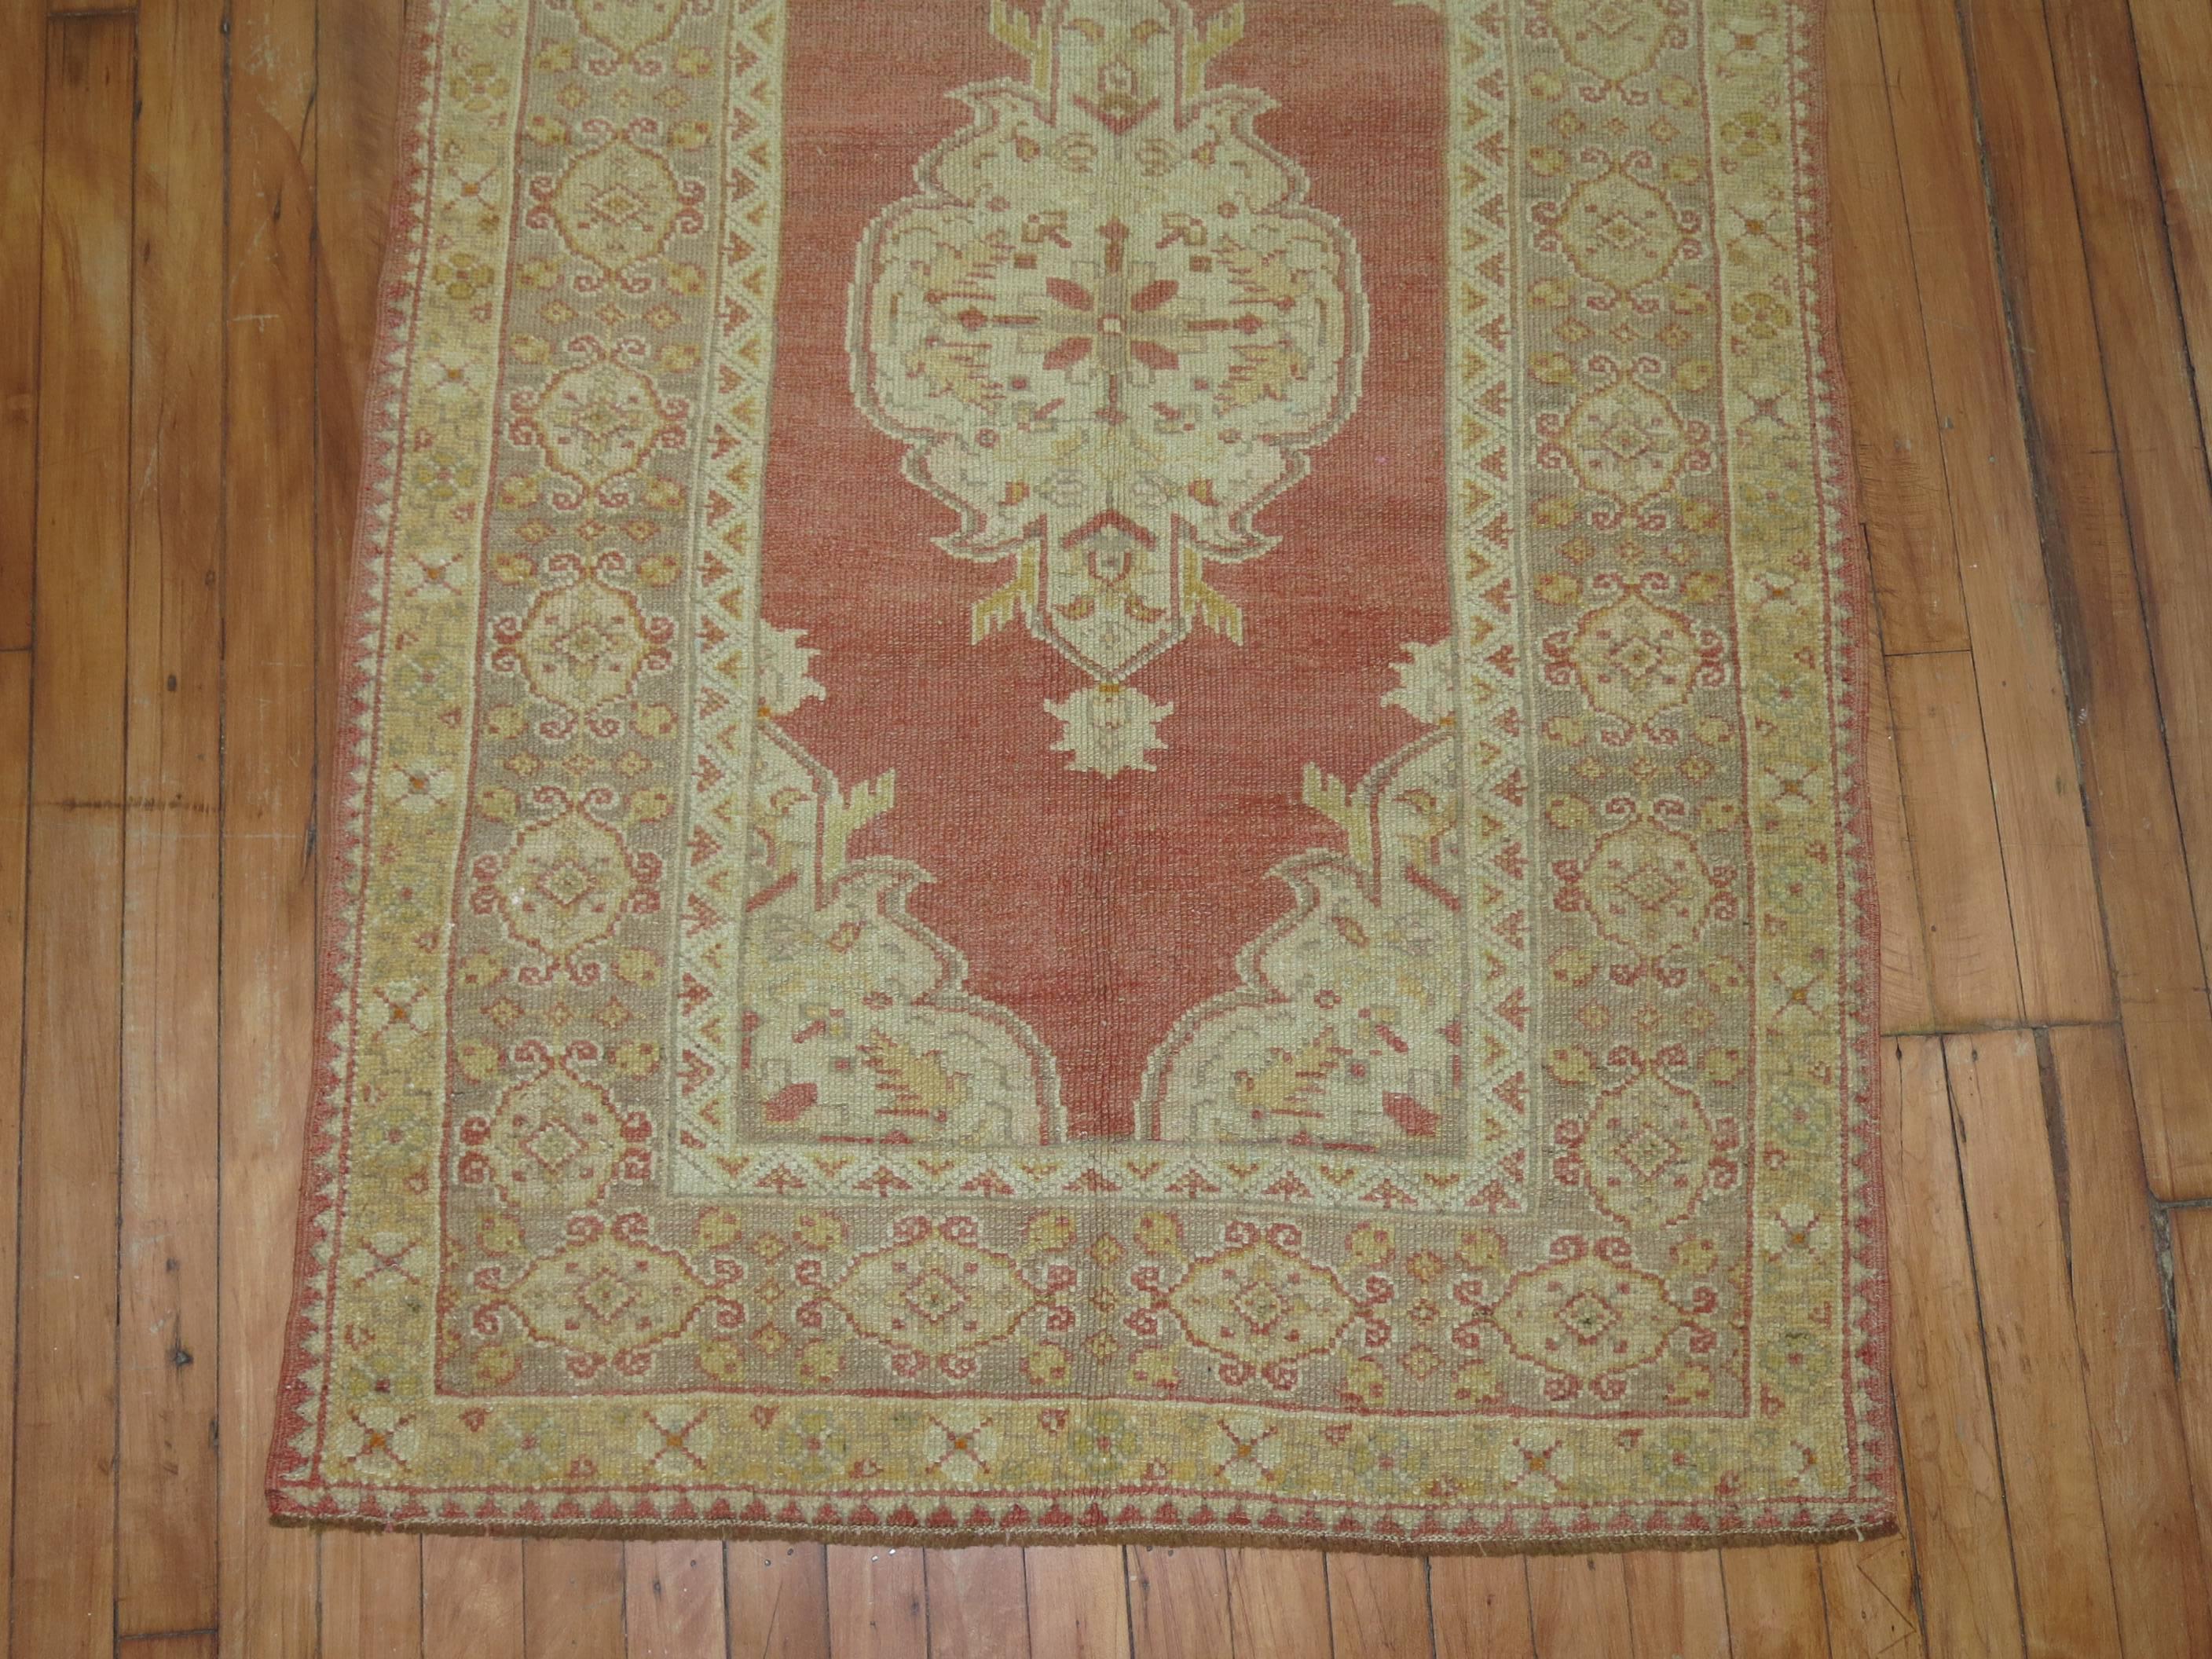 Antique Turkish Sivas formal scatter rug in casual hues.

3'1'' x 5'1''